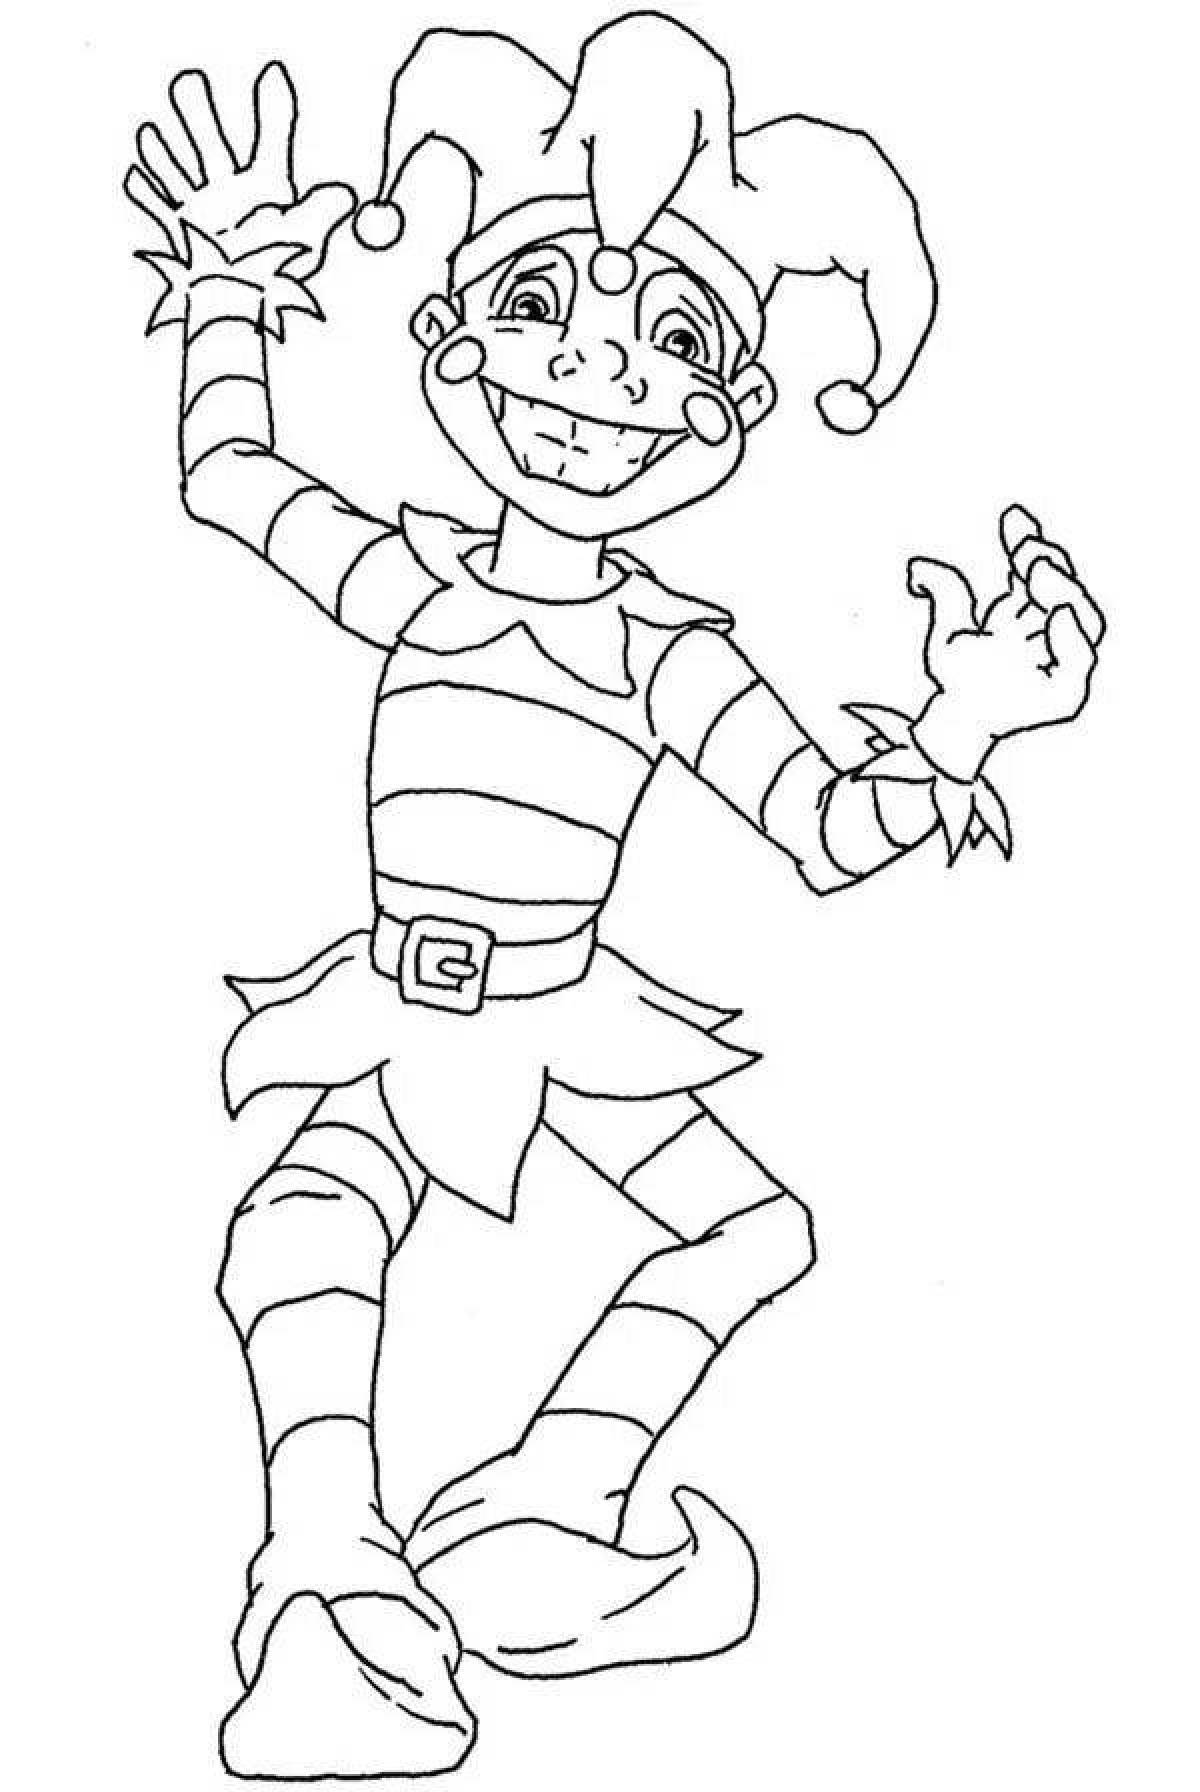 Coloring page energetic jester